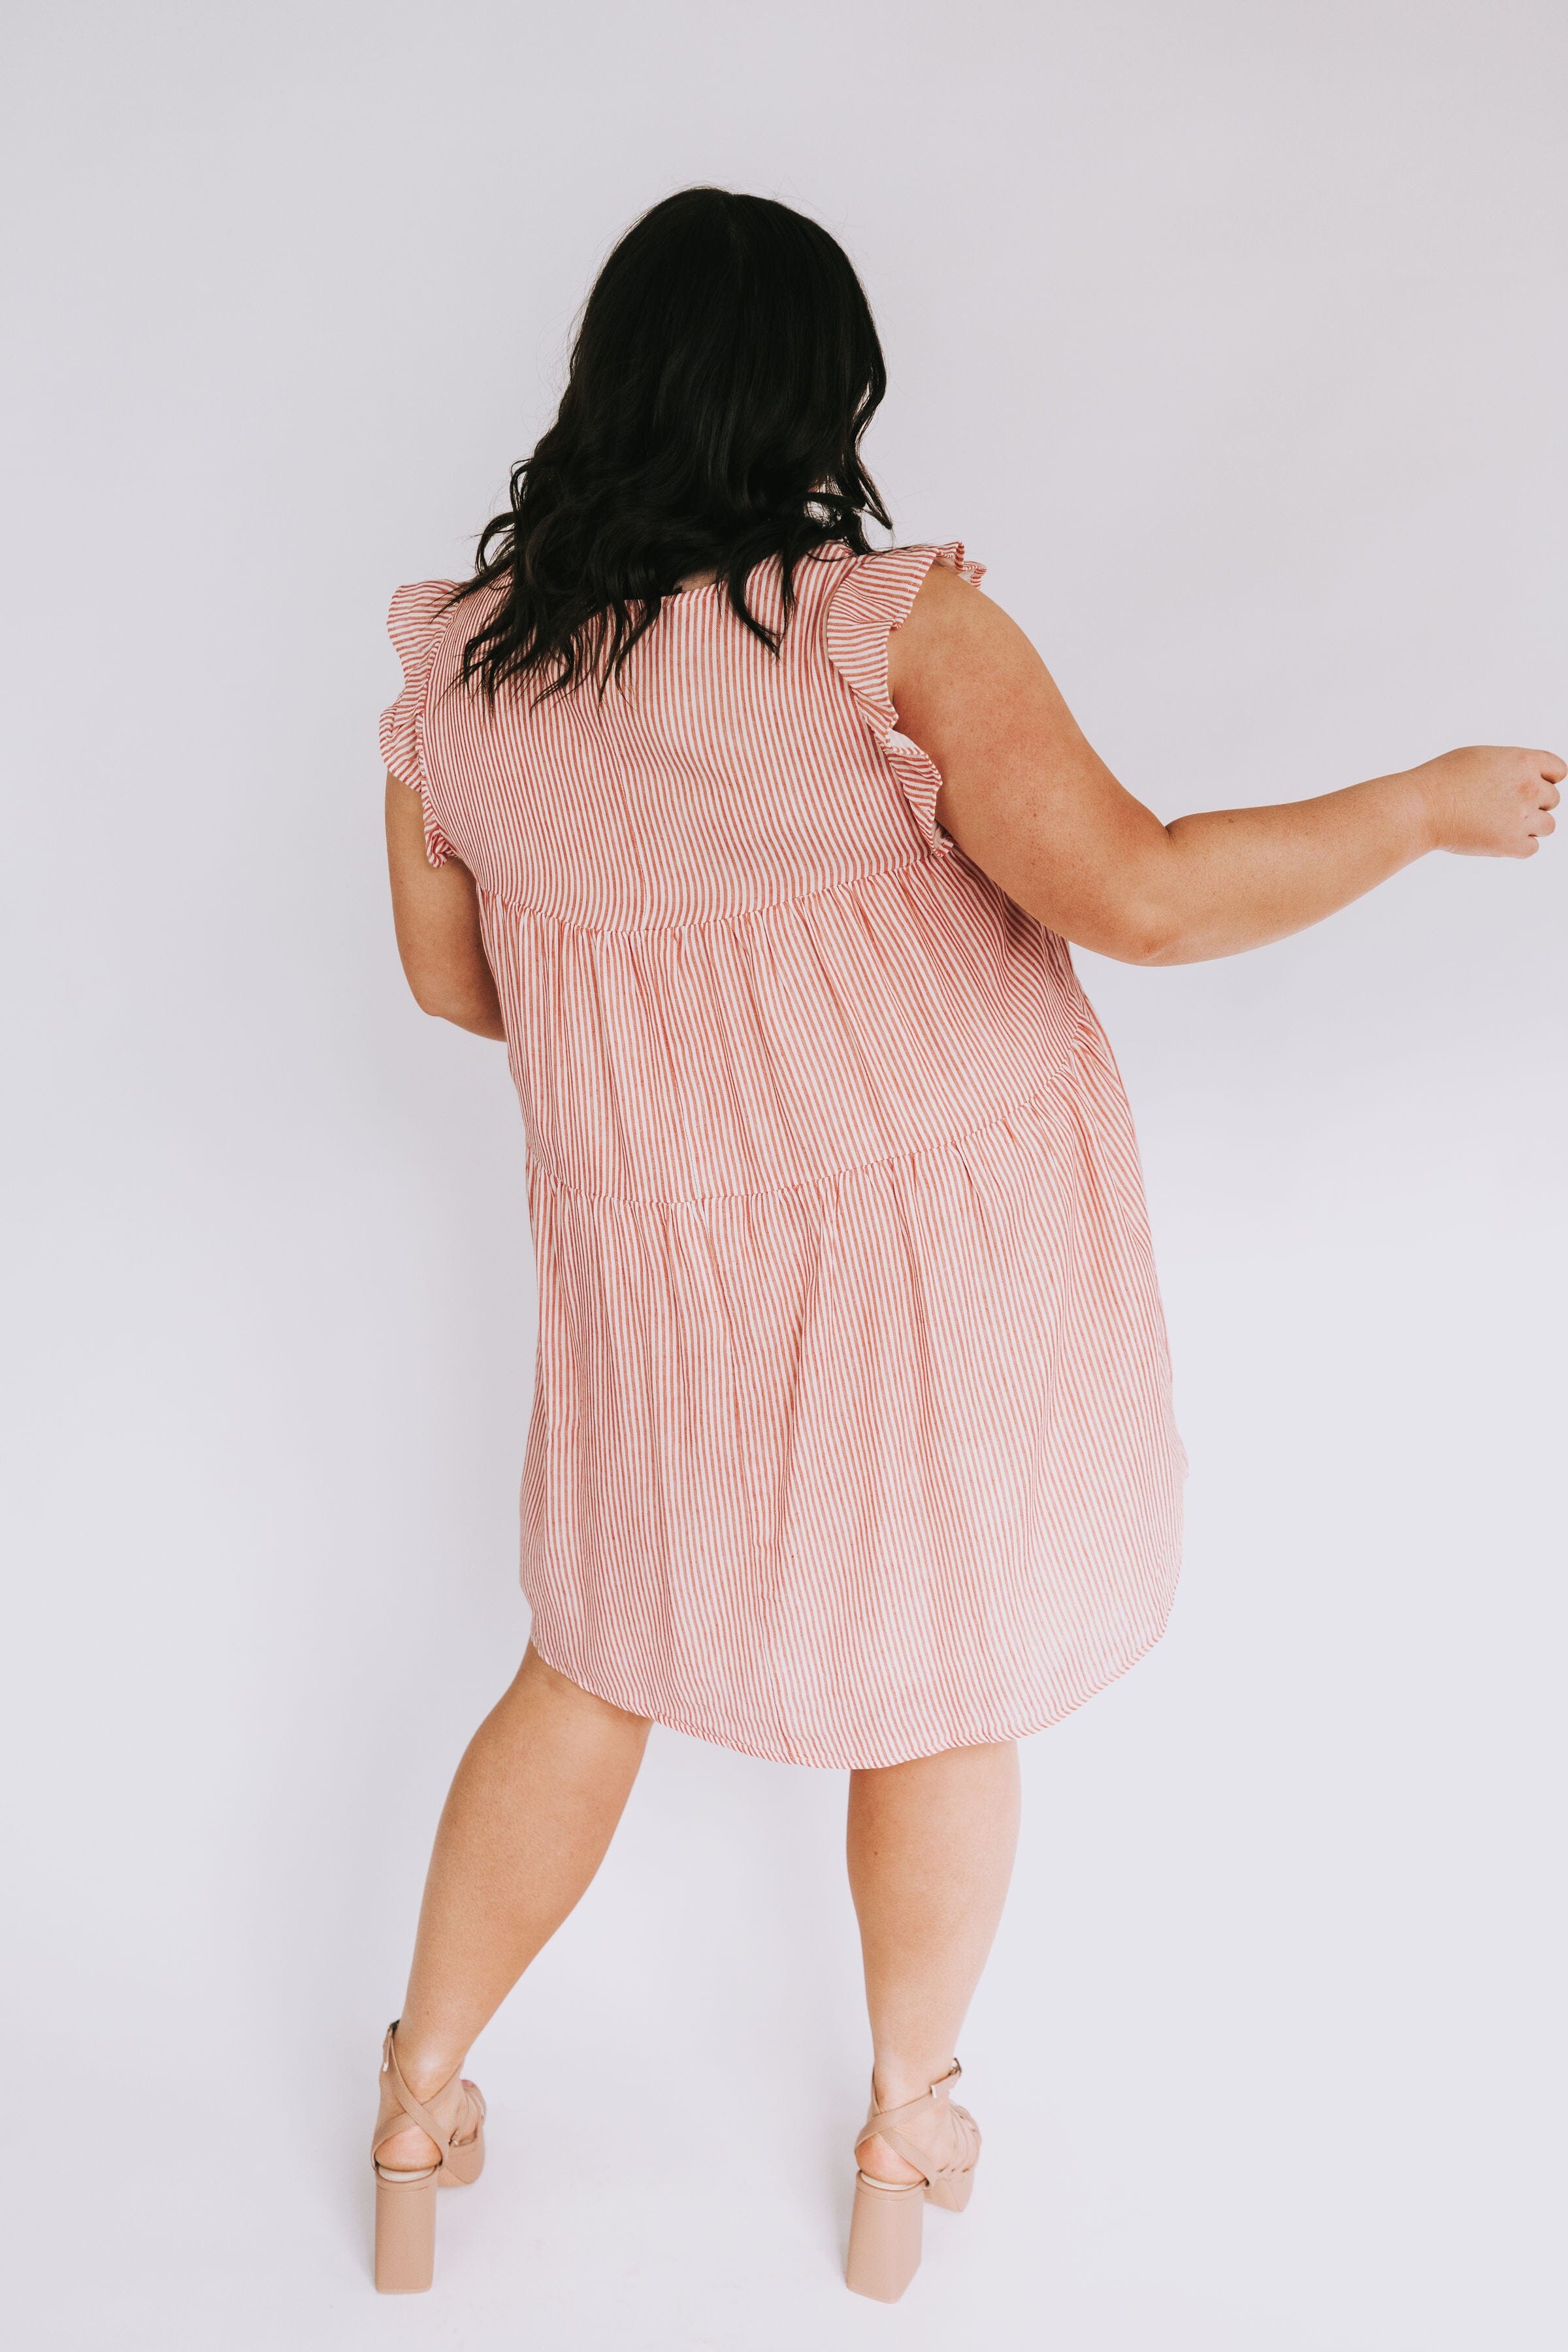 PLUS SIZE - Dancing Forever Dress